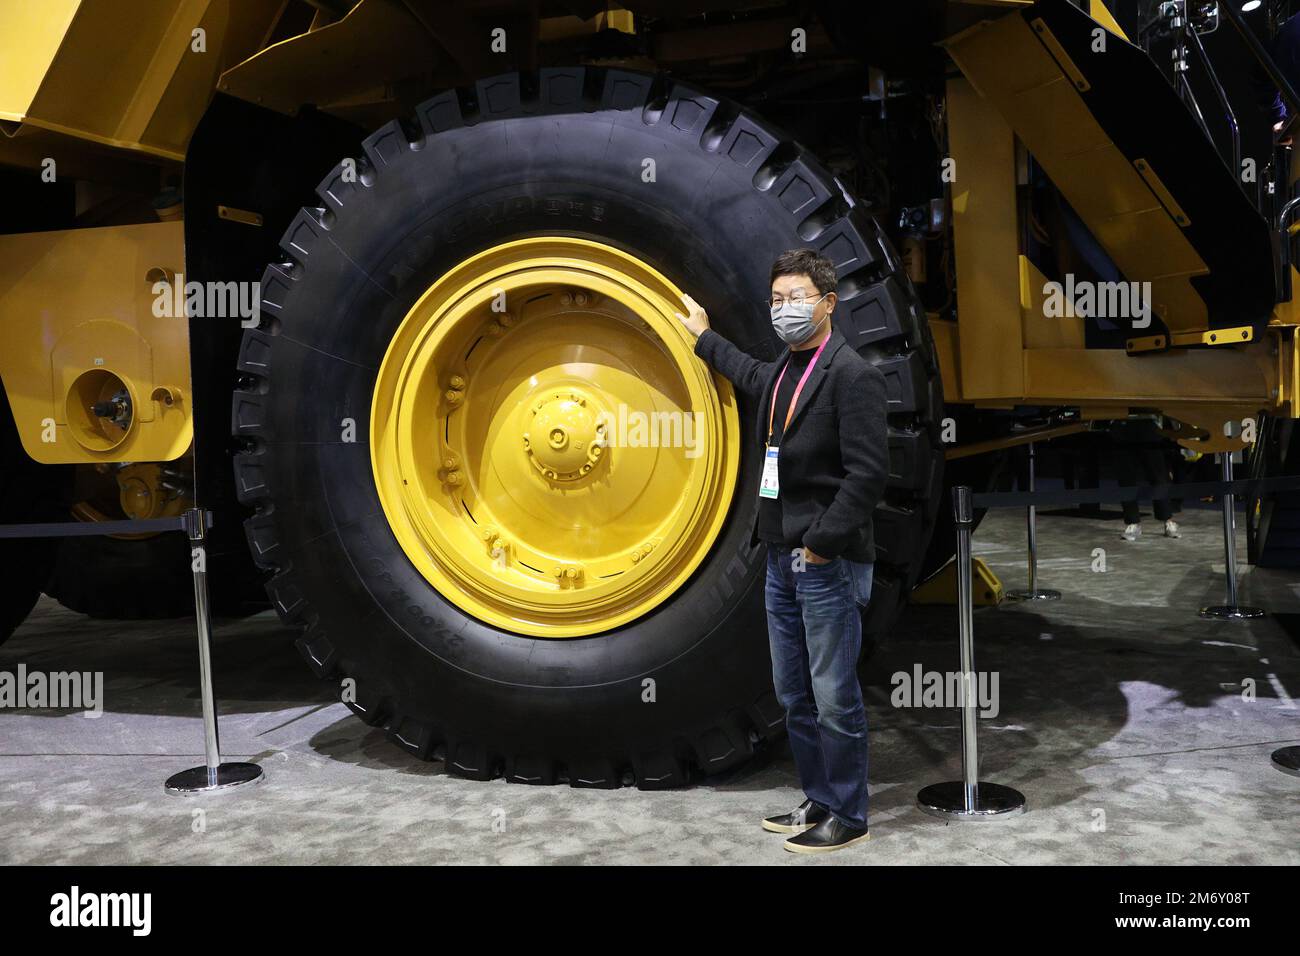 Las Vegas, United States. 05th Jan, 2023. An attendee poses for a photo next to the tire of a Cat777 haul truck, during the 2023 International CES, at the Las Vegas Convention Center in Las Vegas, Nevada on Thursday, January 5, 2023. The Caterpillar 777 is a 100-ton haul truck, typically used in open pit mining, manufactured by Caterpillar Inc. Photo by James Atoa/UPI Credit: UPI/Alamy Live News Stock Photo